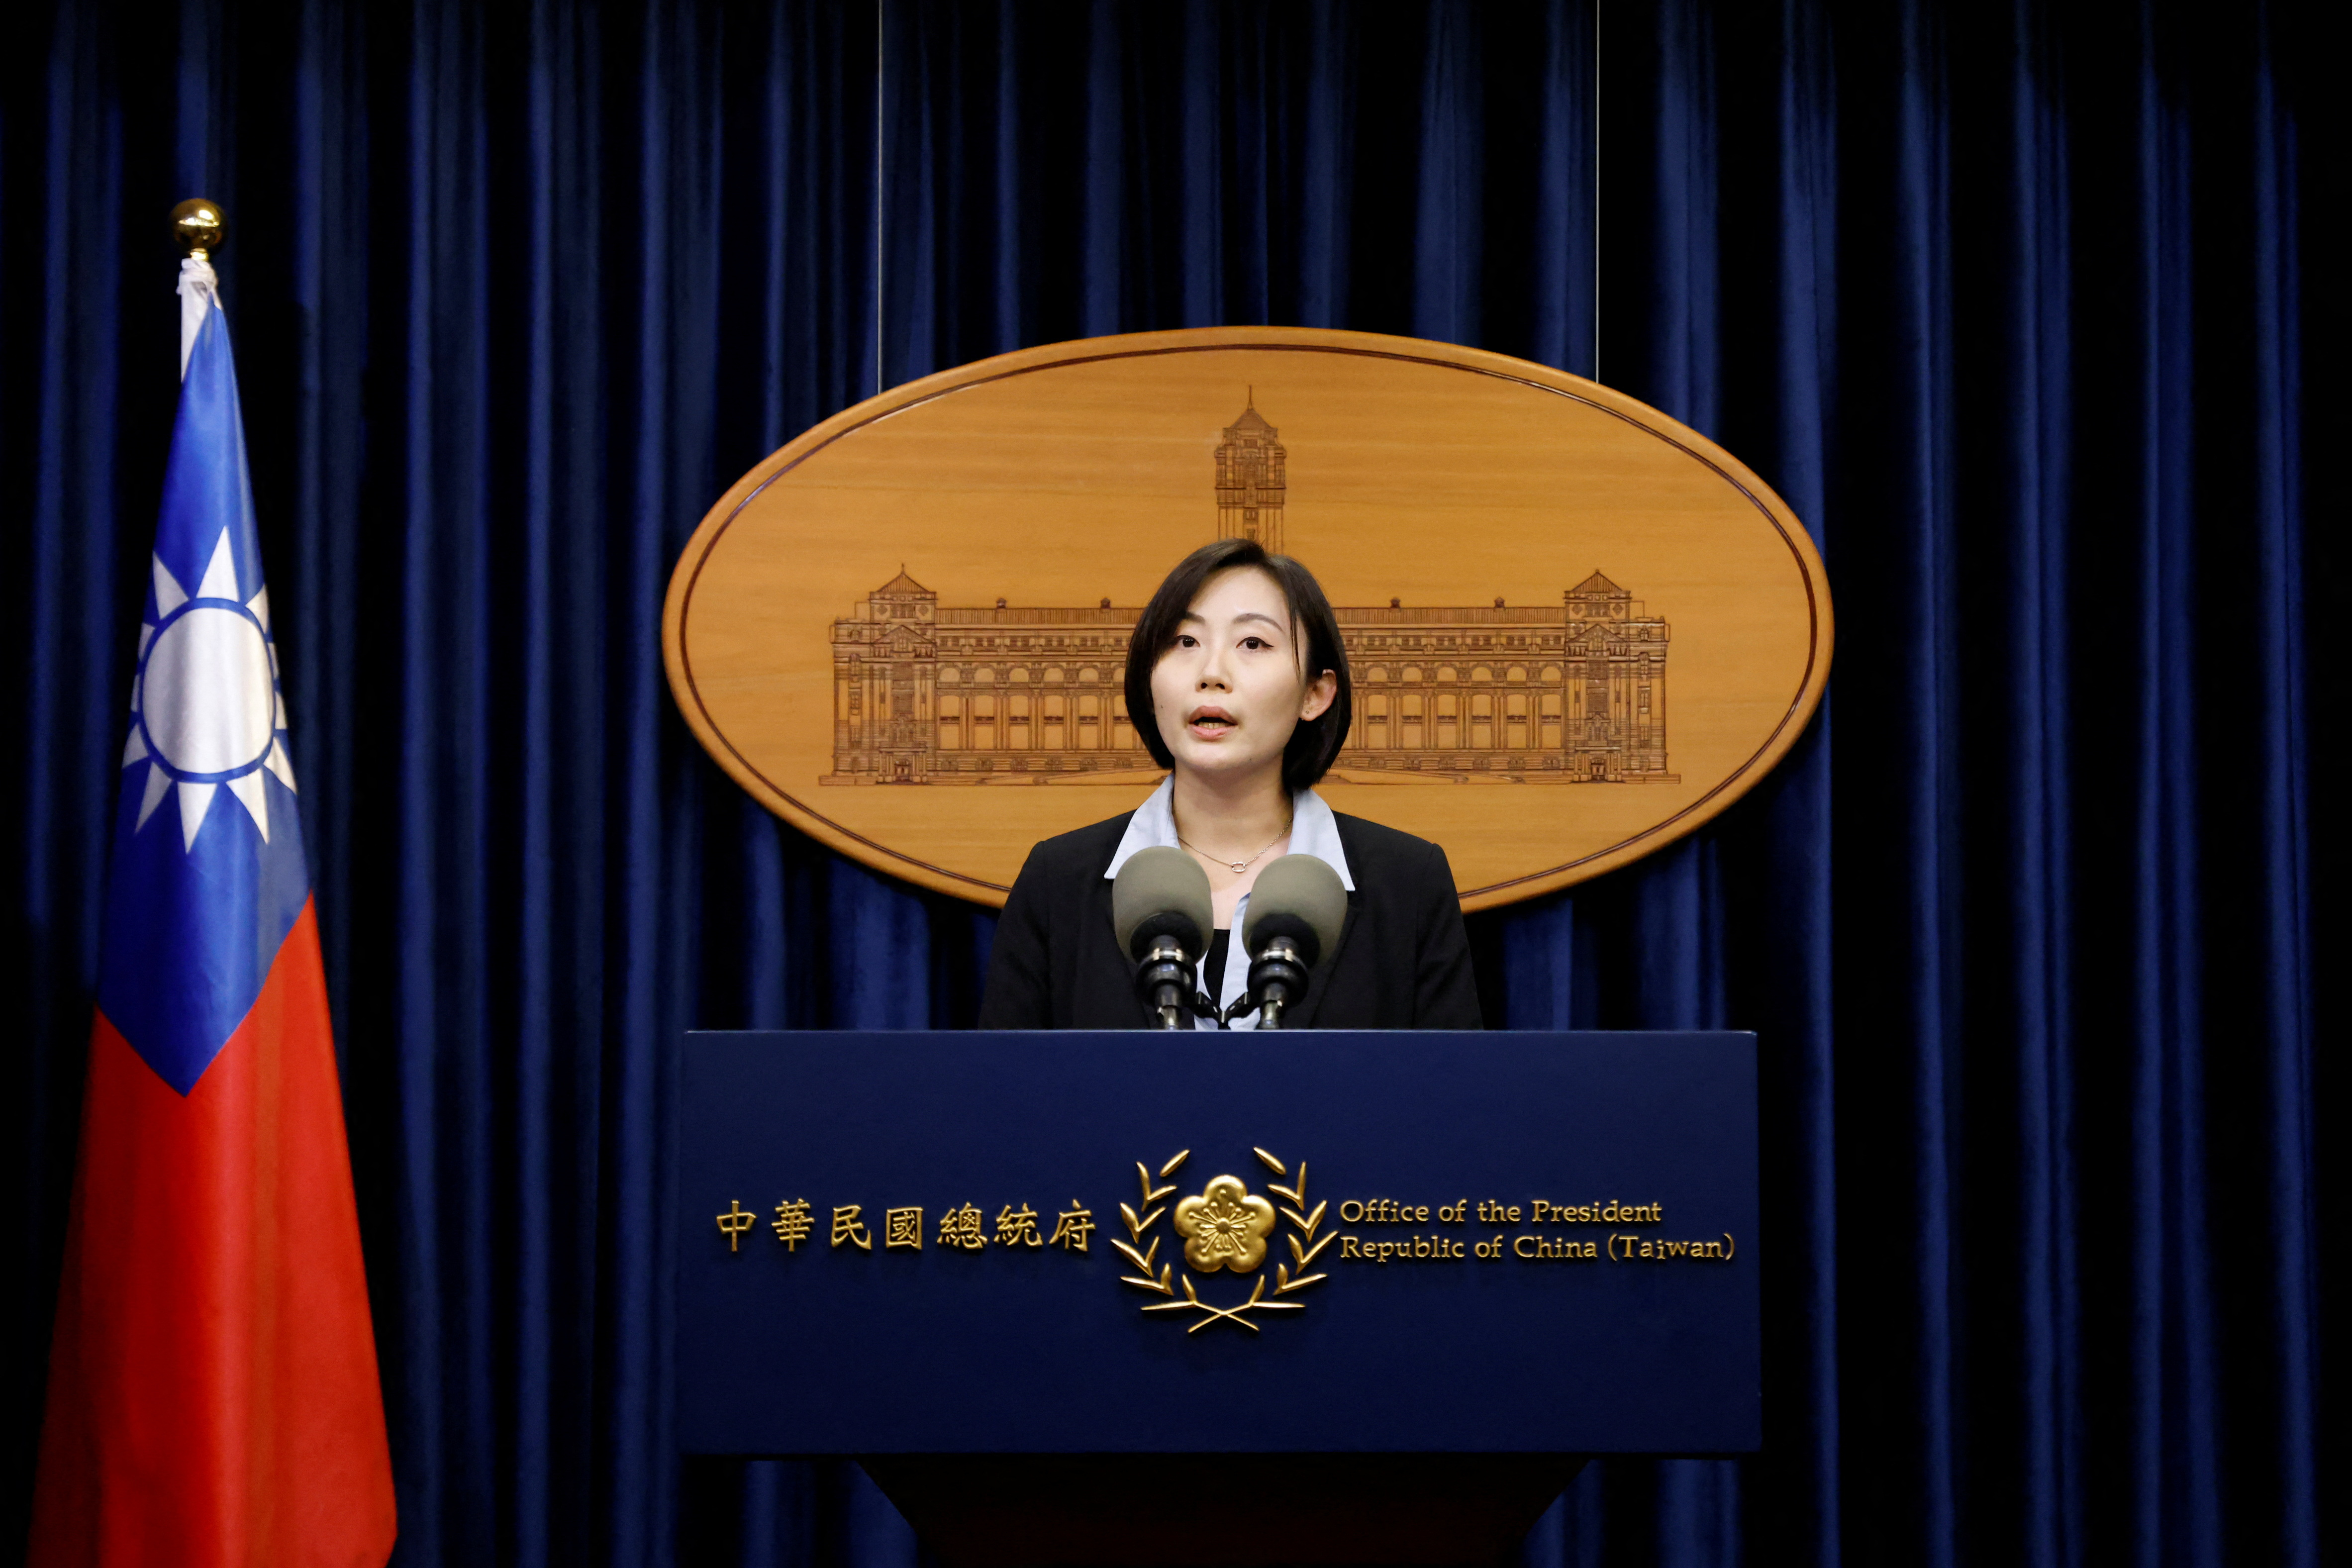 Taiwan presidential office spokesperson Lin Yu-chan speaks during a news conference in Taipei